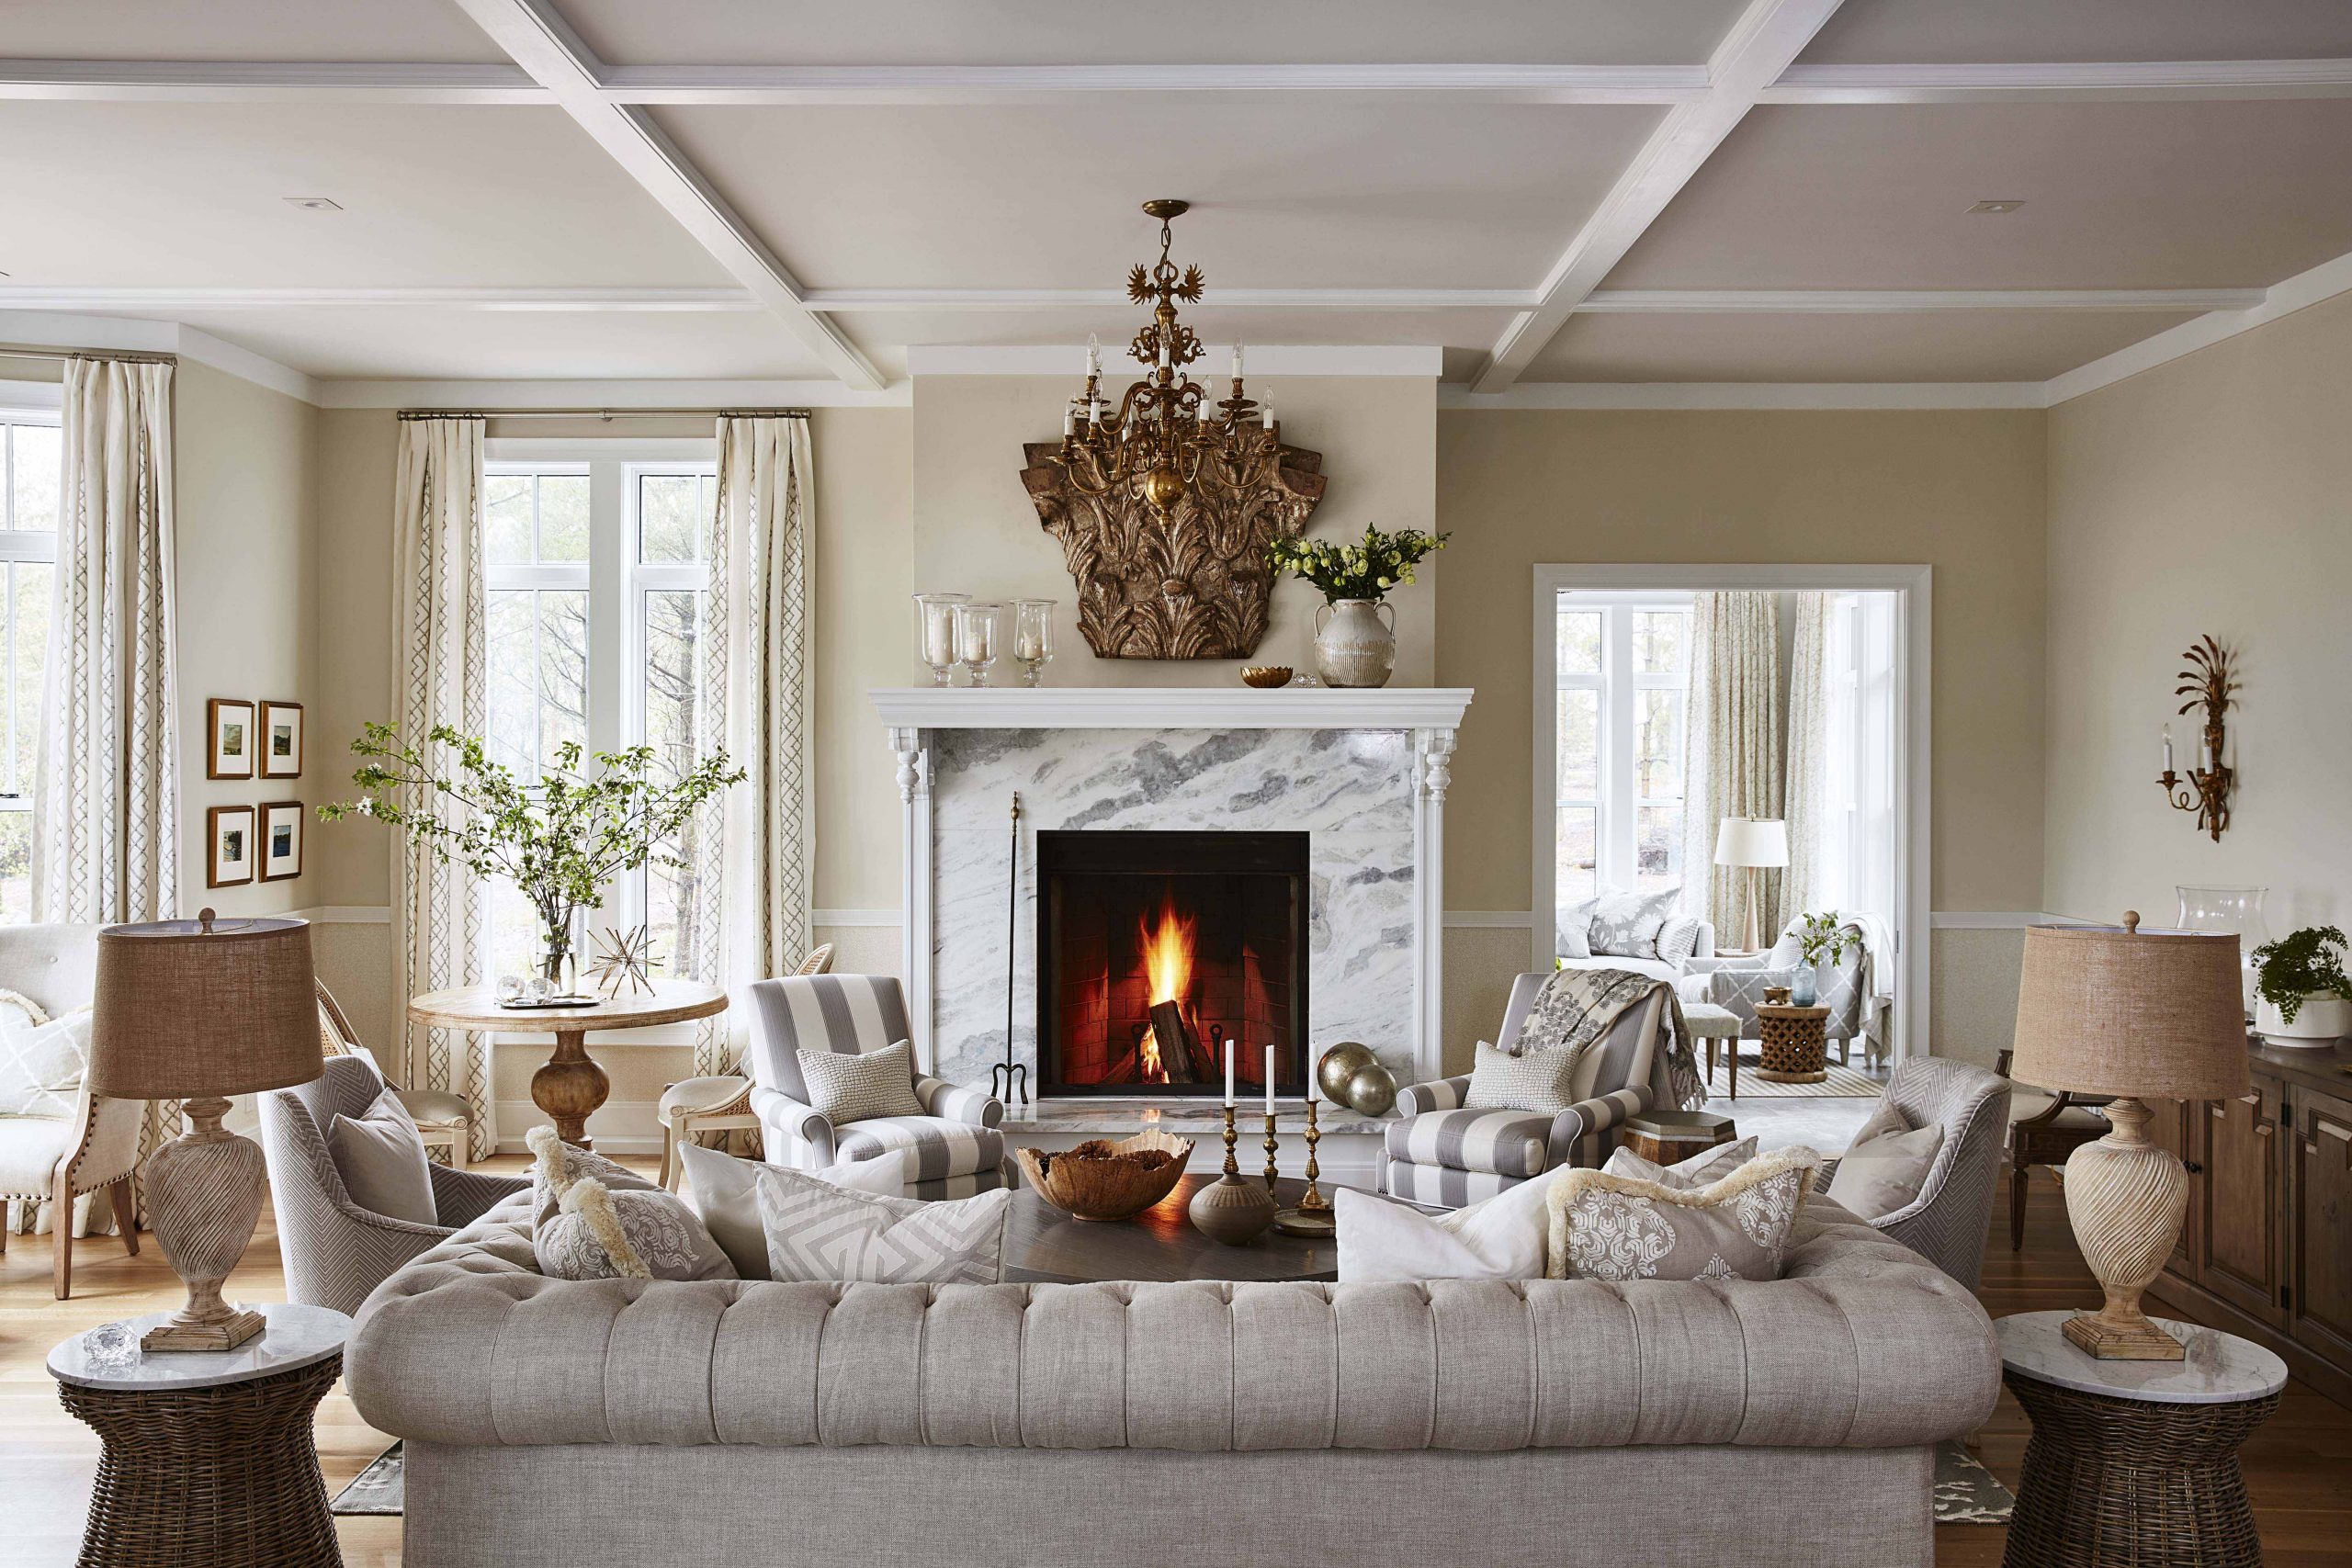 A show-stopping marble fireplace, neutral furniture and lots of textured fabrics create the luxurious look of this living room.